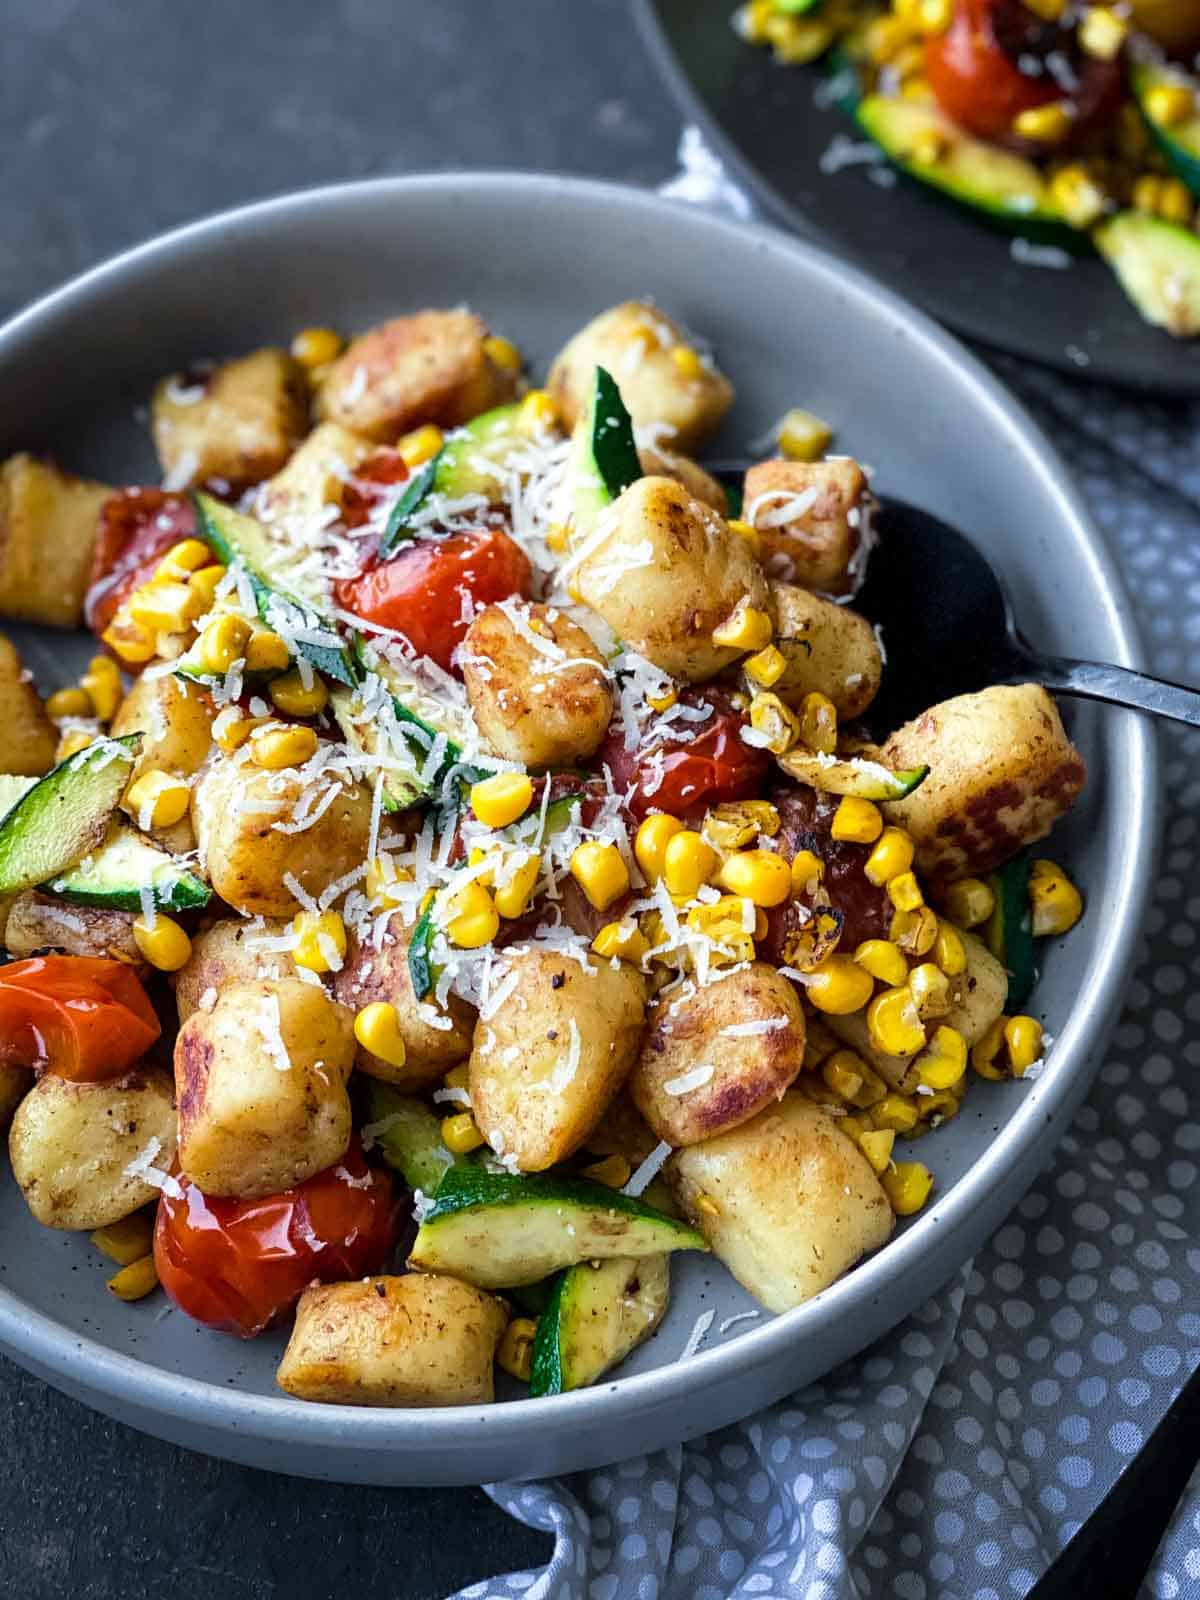 Pan Fried Gnocchi with Tomato, Corn and Zucchini in a grey bowl with dotted linen